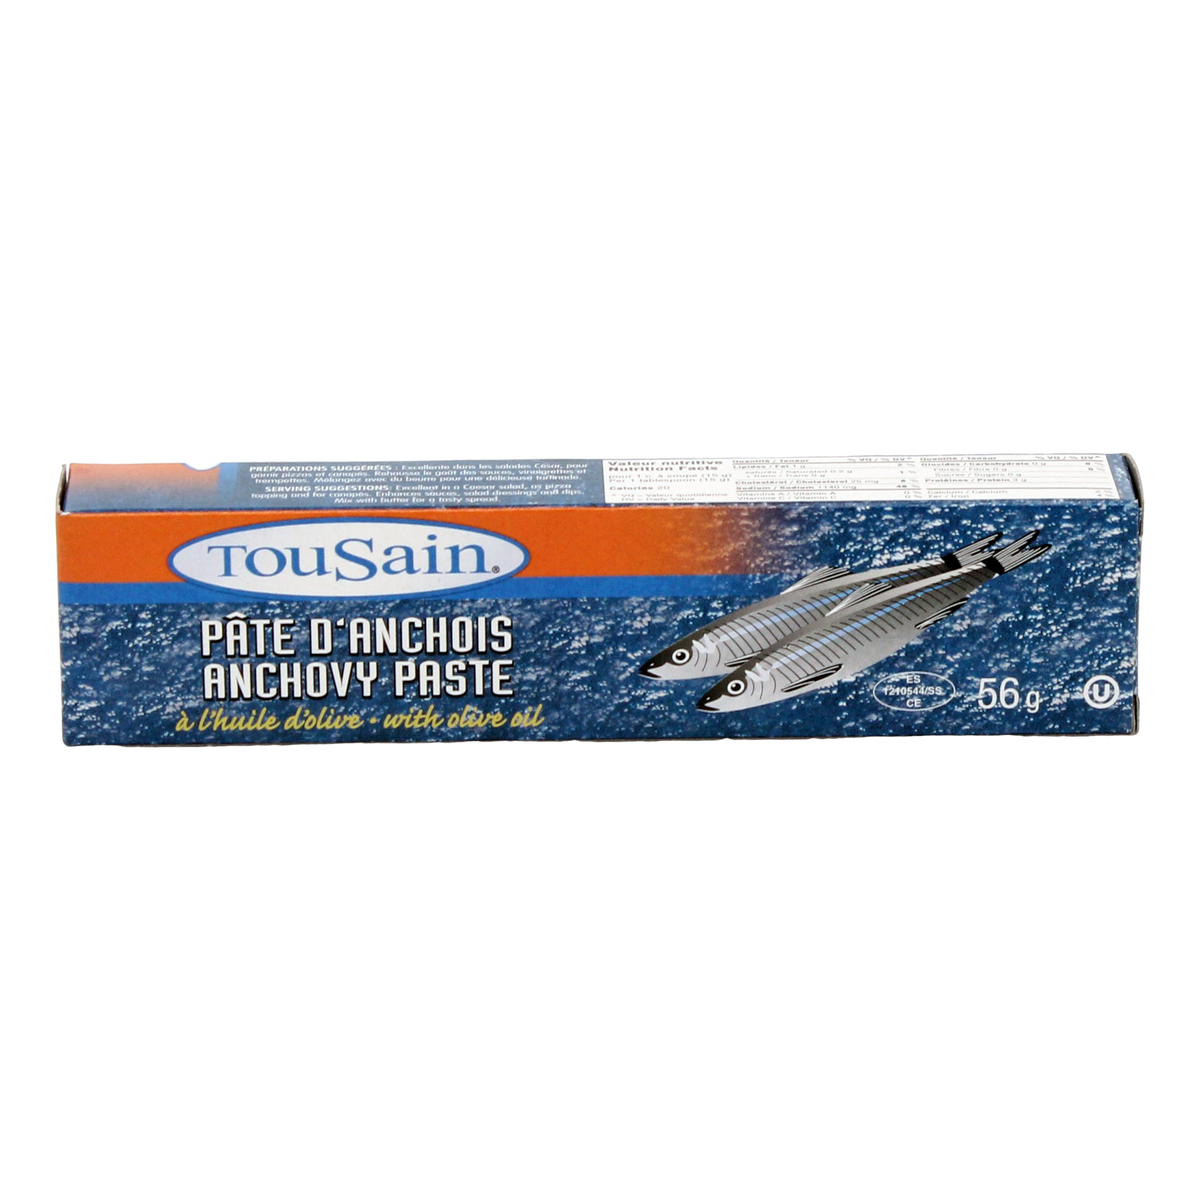 anchovy paste equals fillets